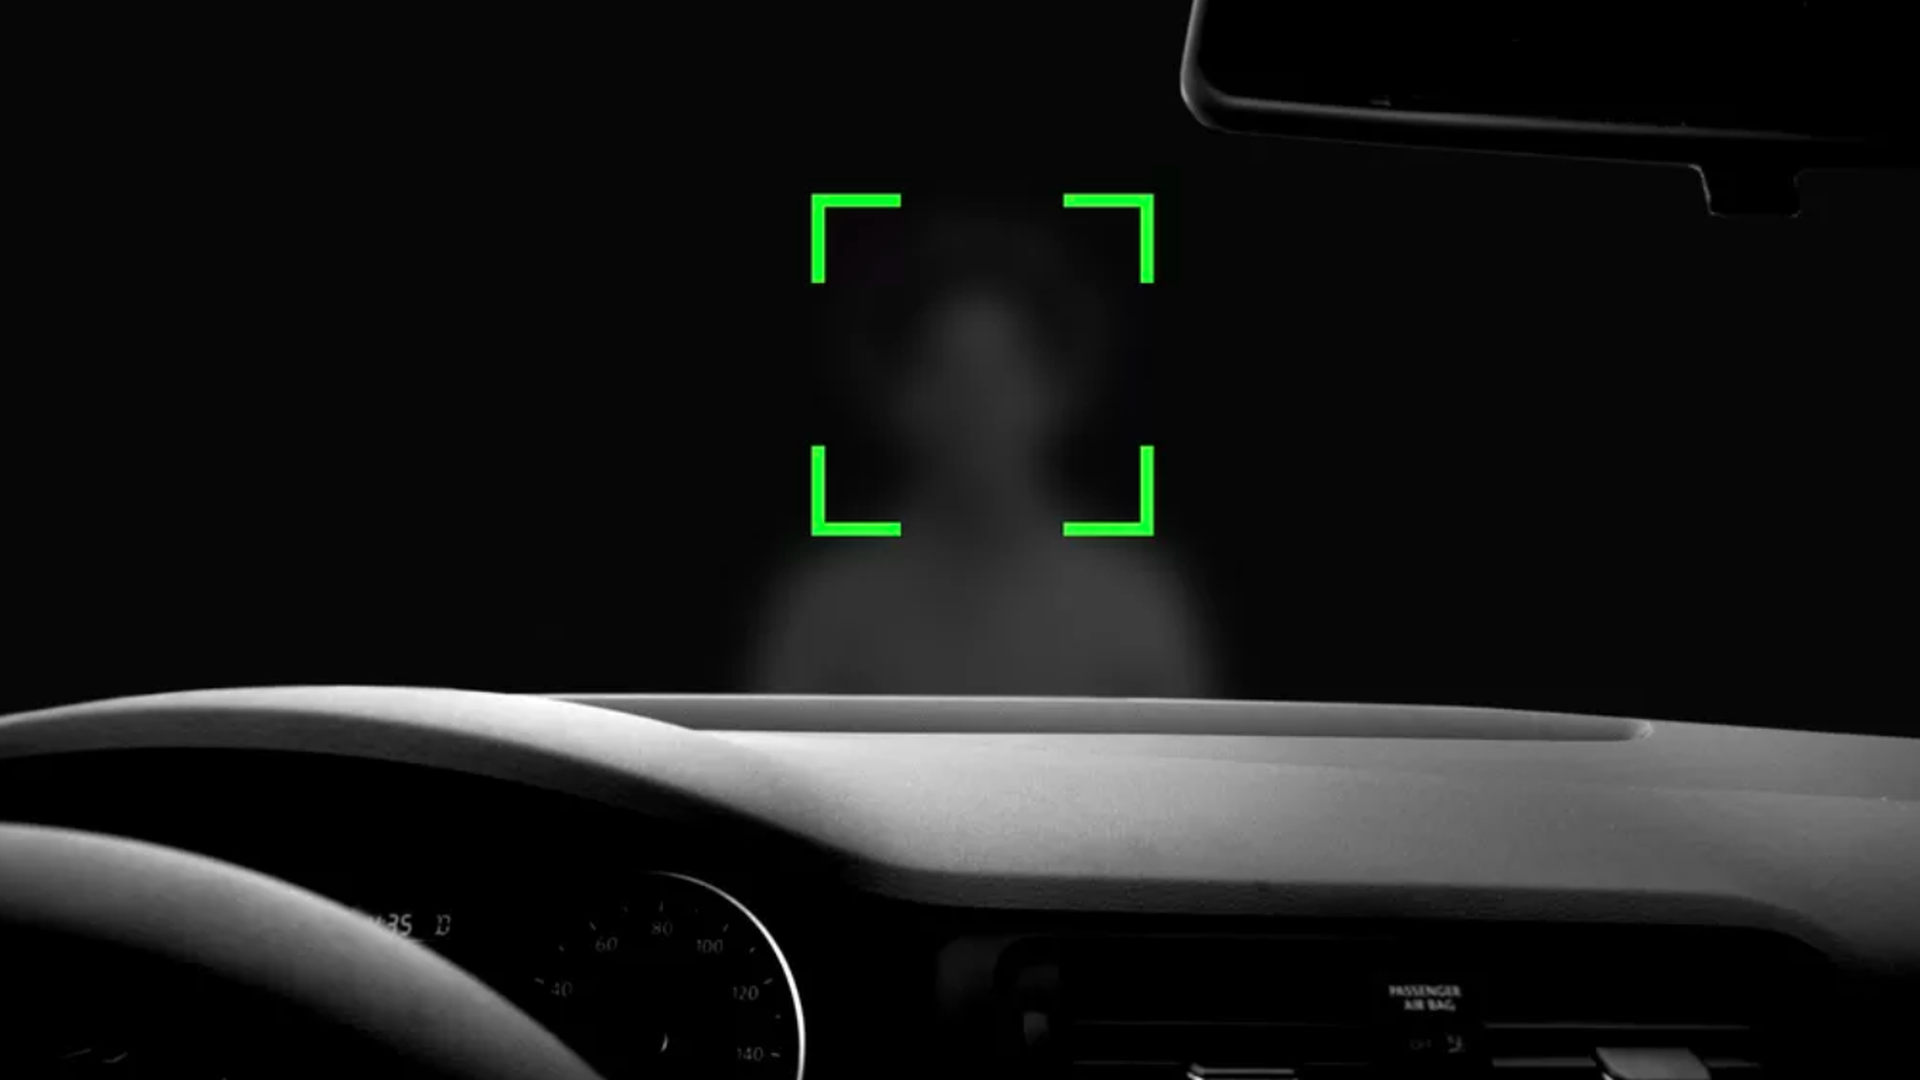 In this illustration, the viewer looks through the windshield from inside a car and sees a green square around a blurred persons face.